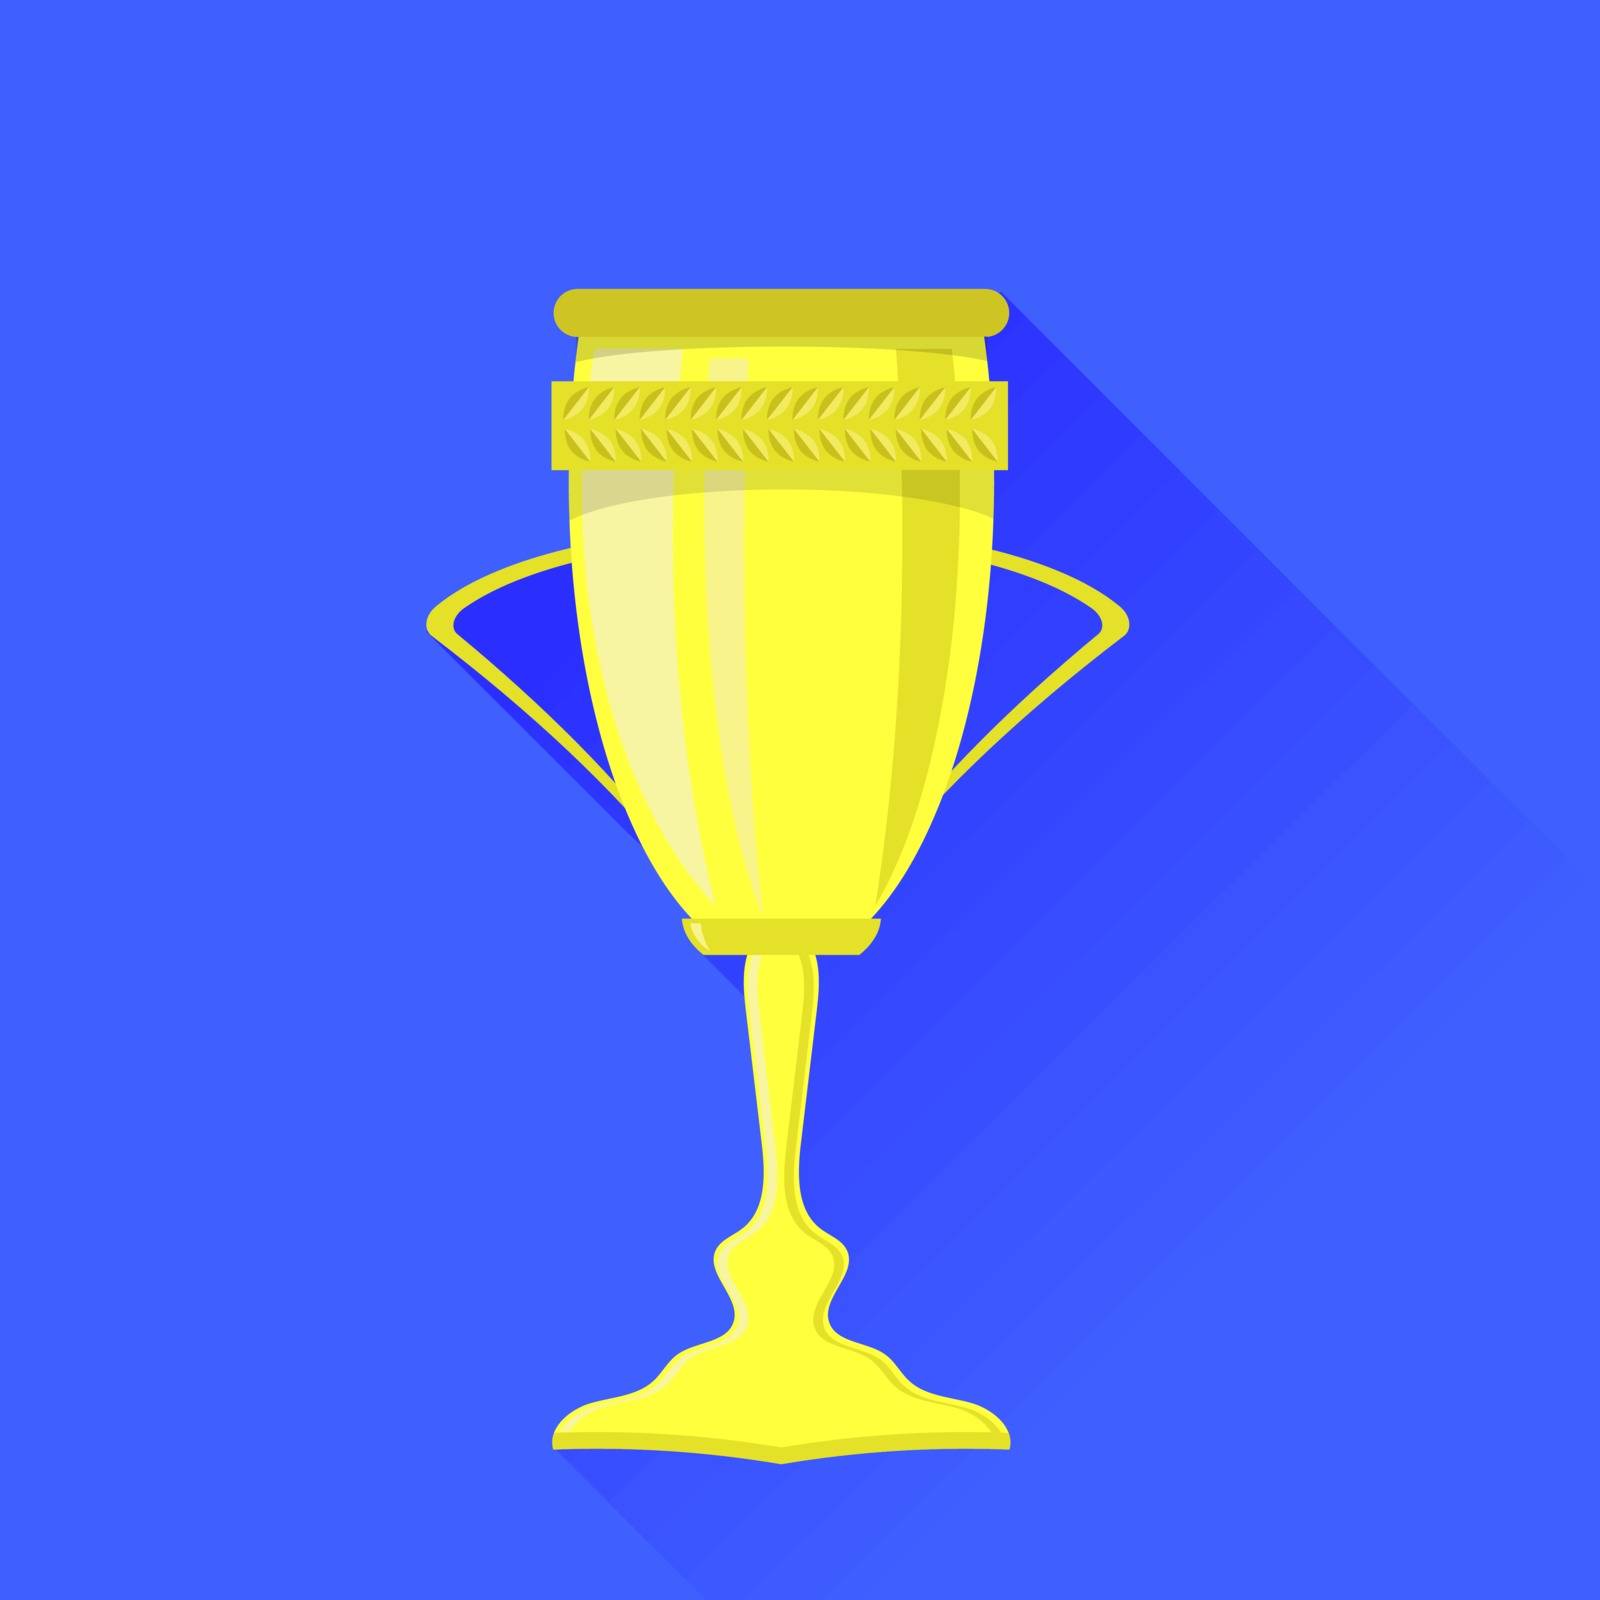 Award Icon Isolated on Blue Background. Winner Cup Symbol